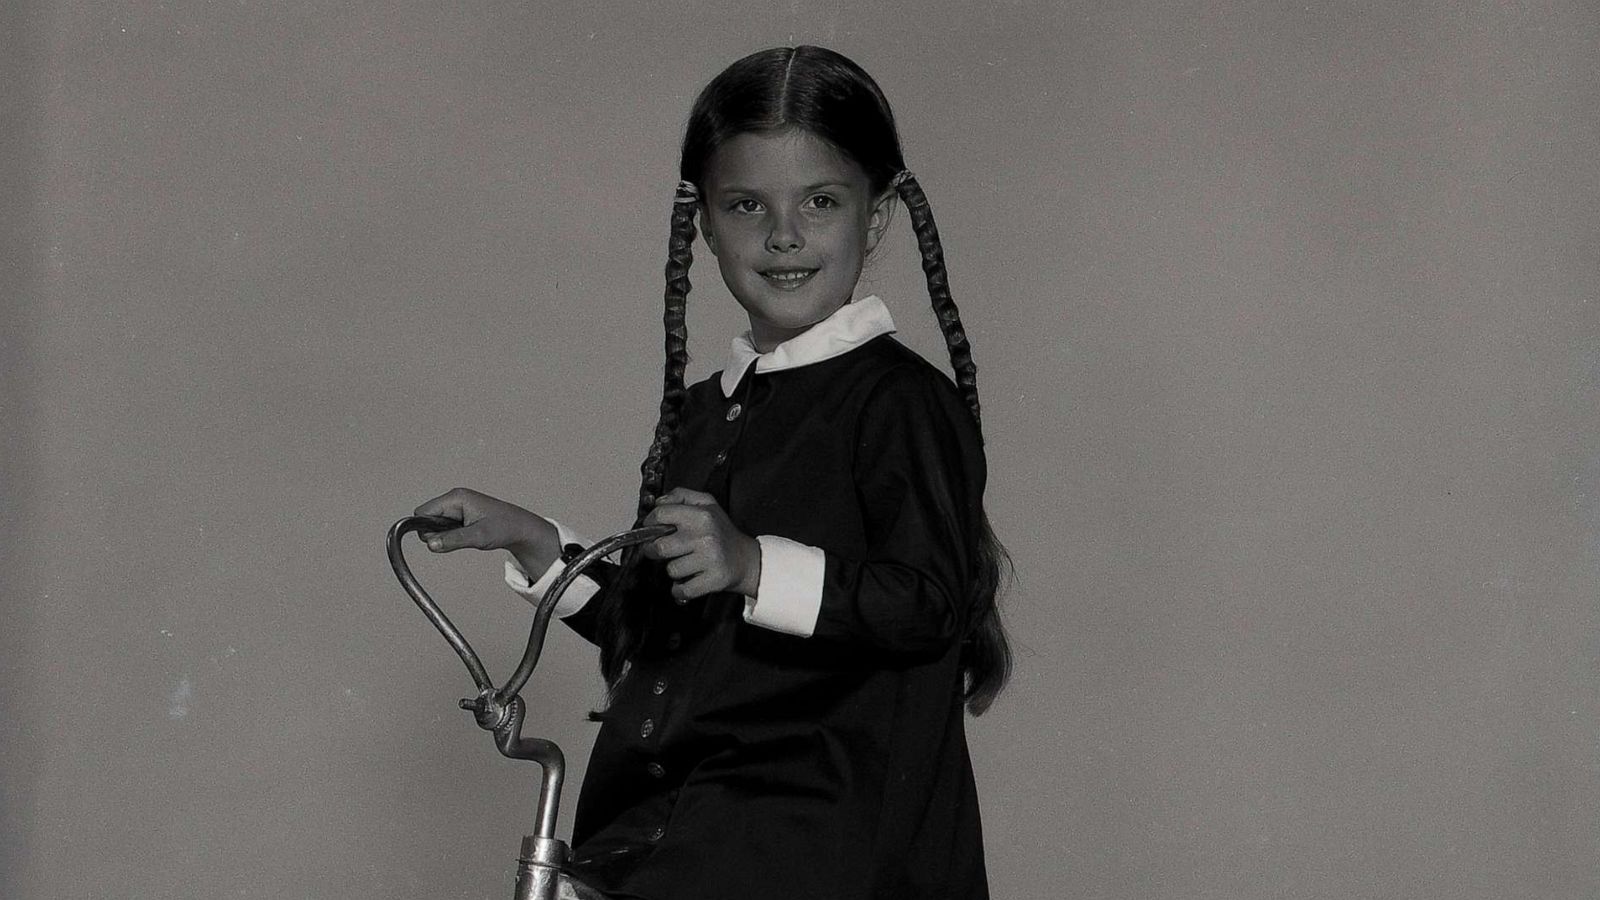 Does Wednesday Addams die in Netflix's Wednesday?